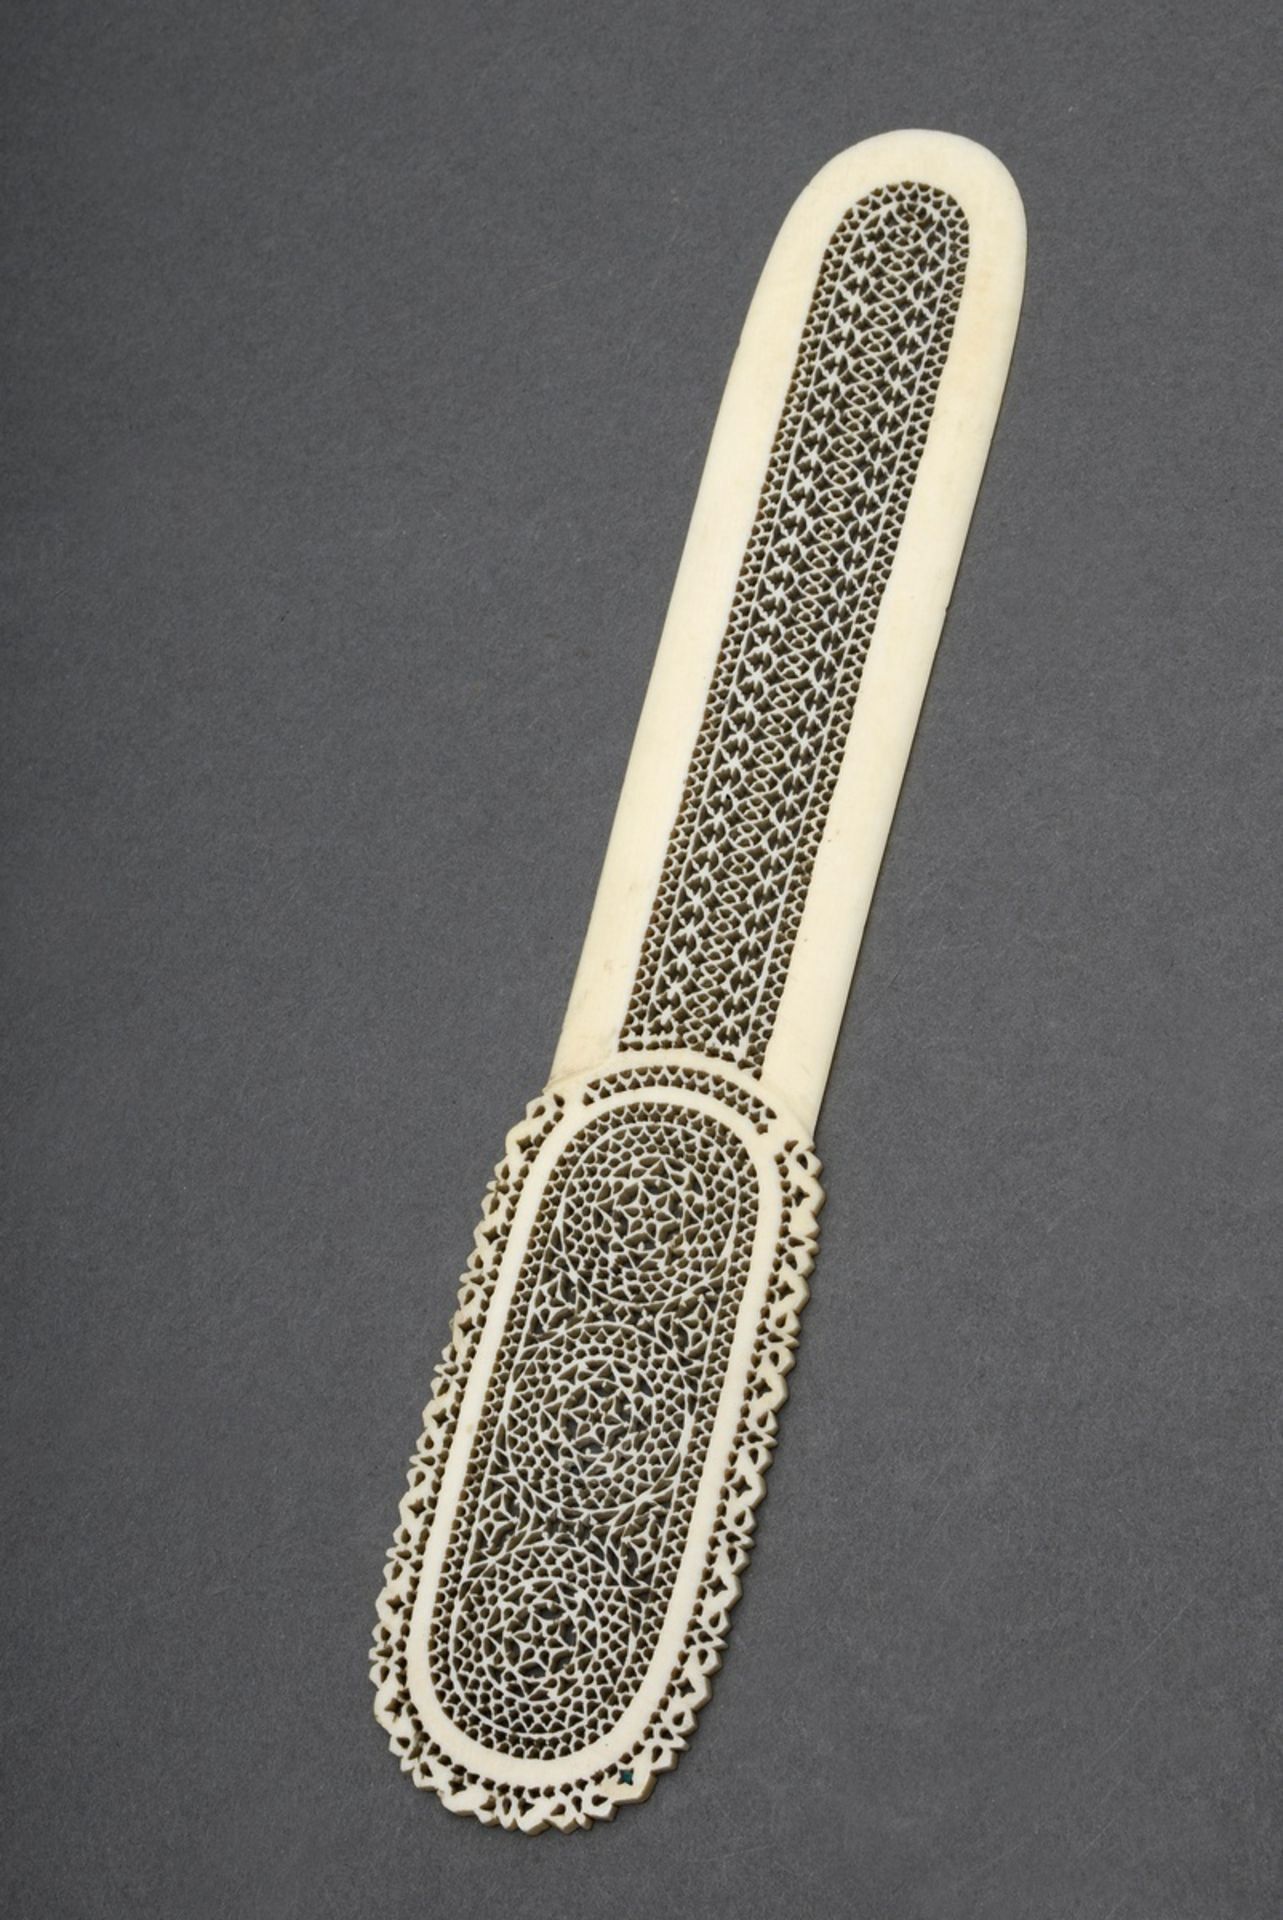 Indian ivory letter opener in ornamentally sawn openwork, 19th century, l. 24cm, licence according